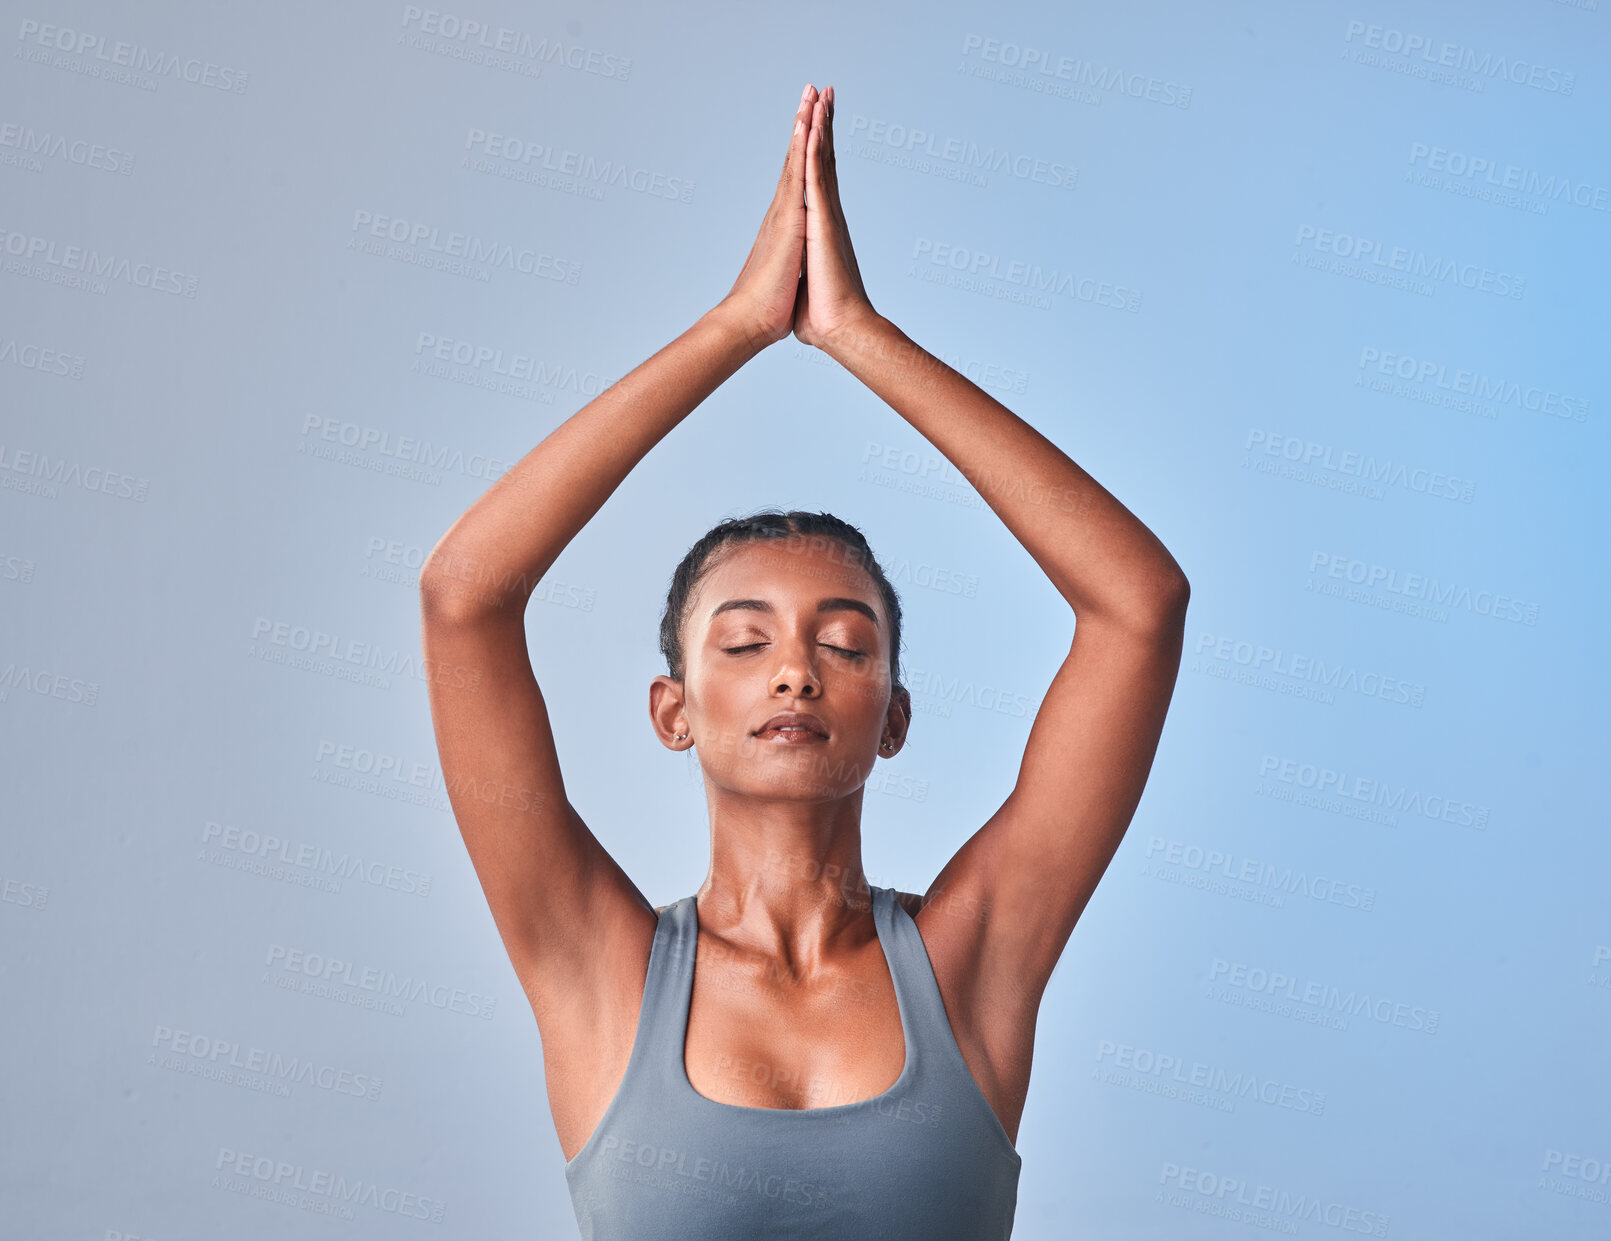 Buy stock photo Studio shot of a fit young woman meditating against a grey background